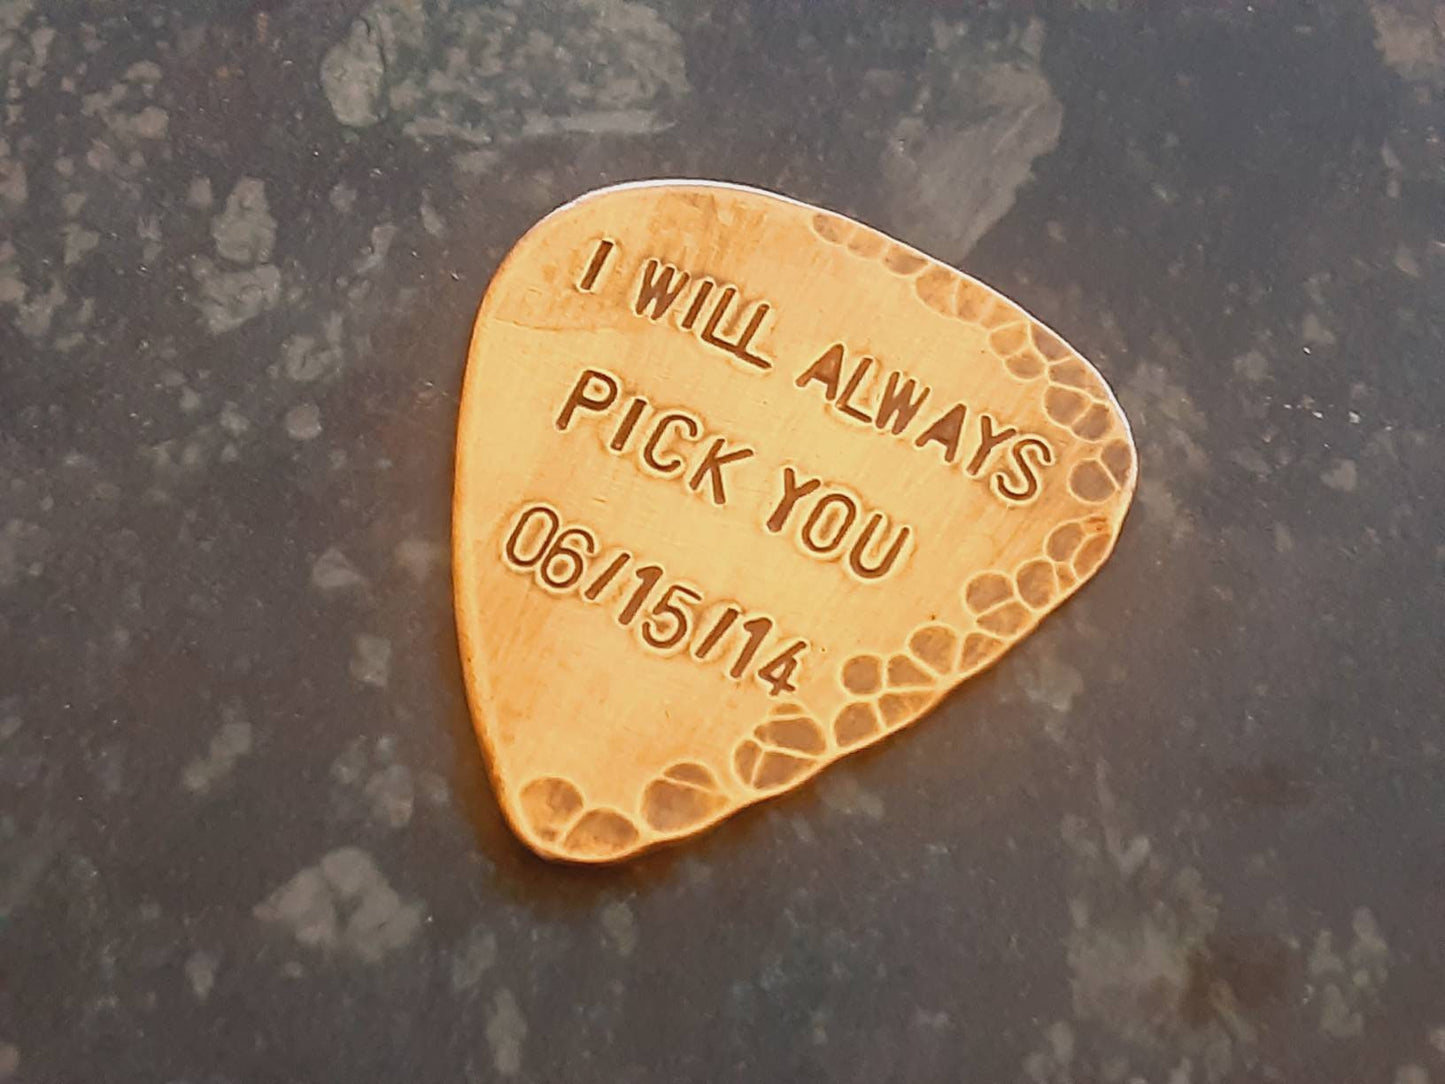 Playable bronze guitar pick - perfect for 8th or 19th bronze anniversary